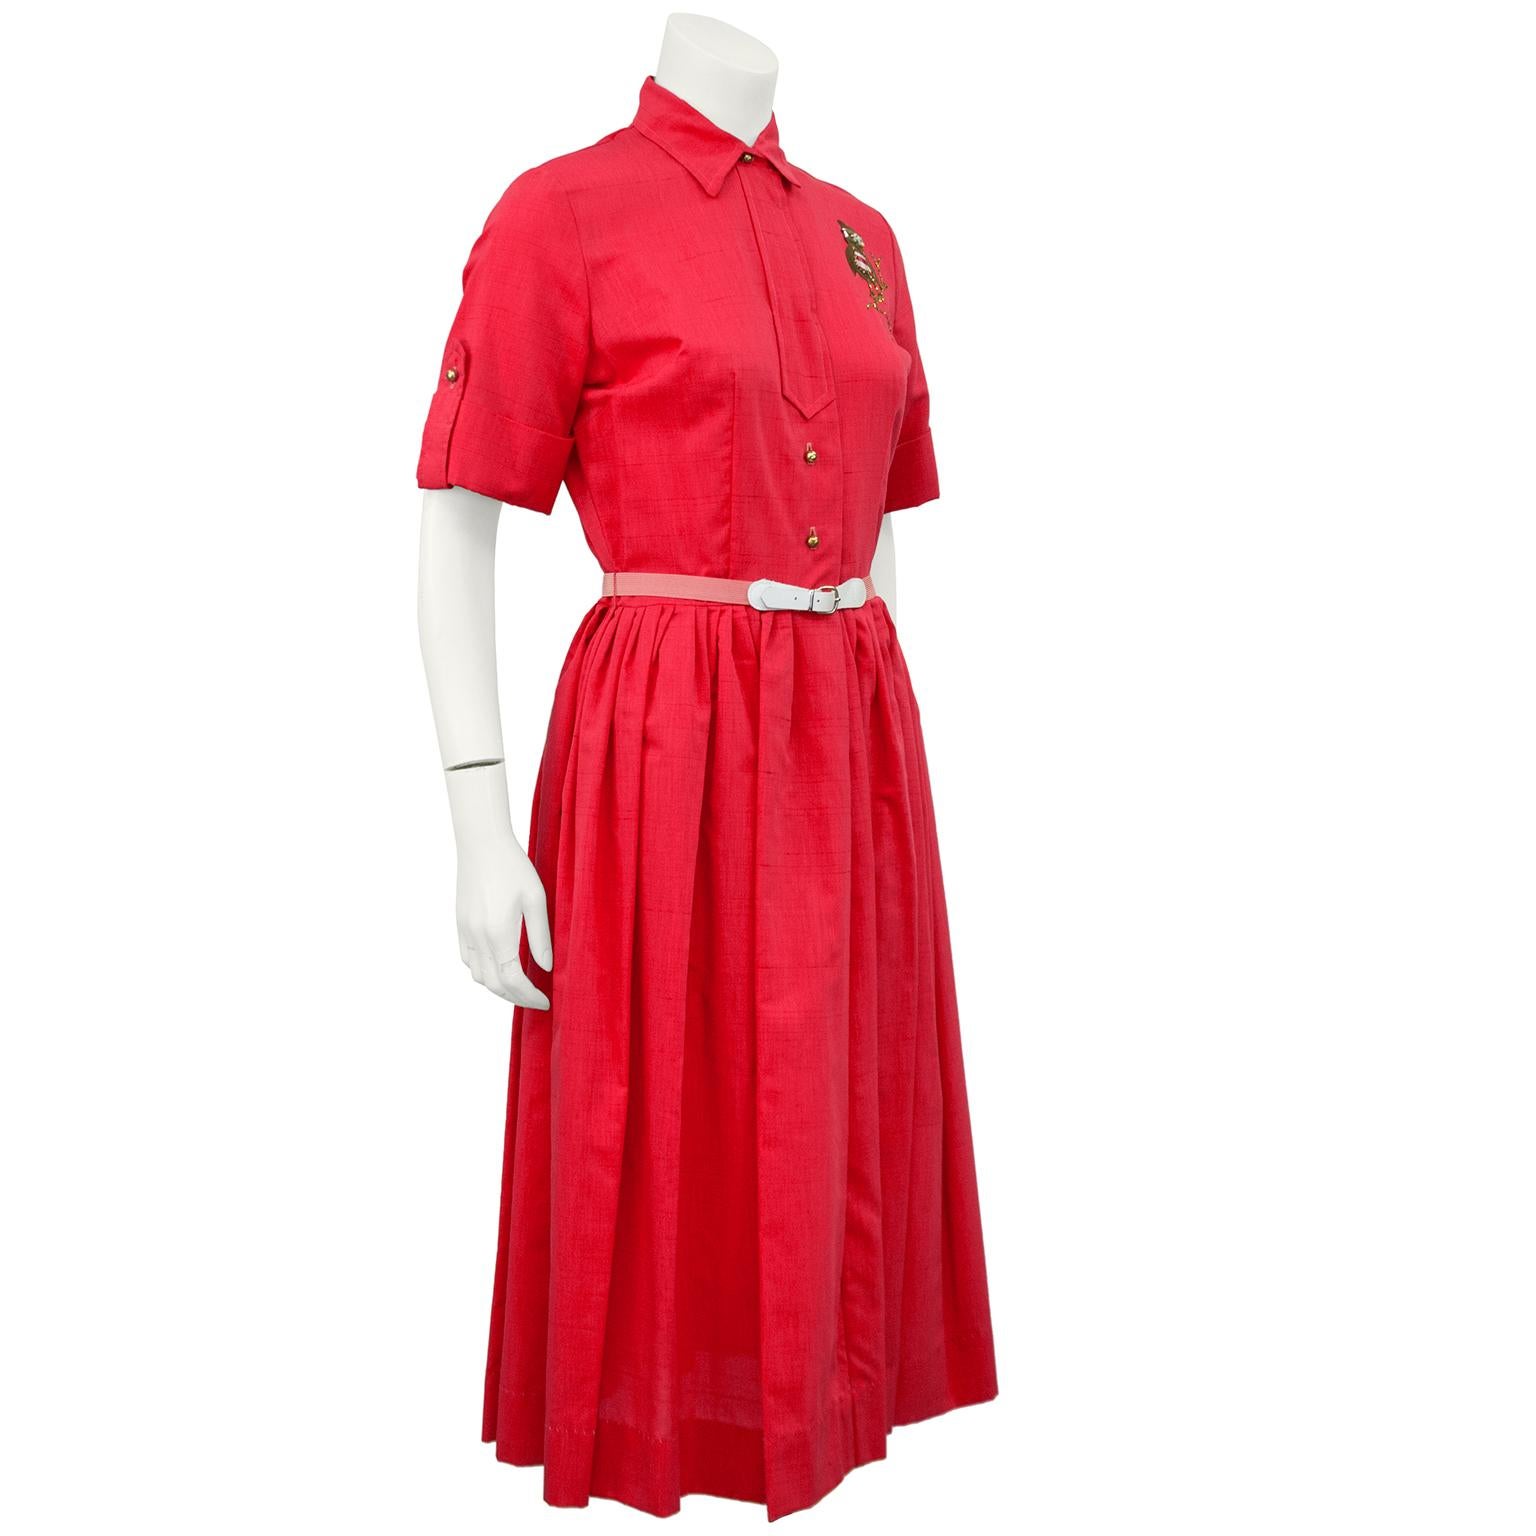 Adorable dead stock 1960s coral shirtdress with belt and gold ball buttons. Cuffs on the sleeves are finished with matching buttons and hidden snap behind front placket. Gathering at the natural waist creates an full line skirt and the blush elastic